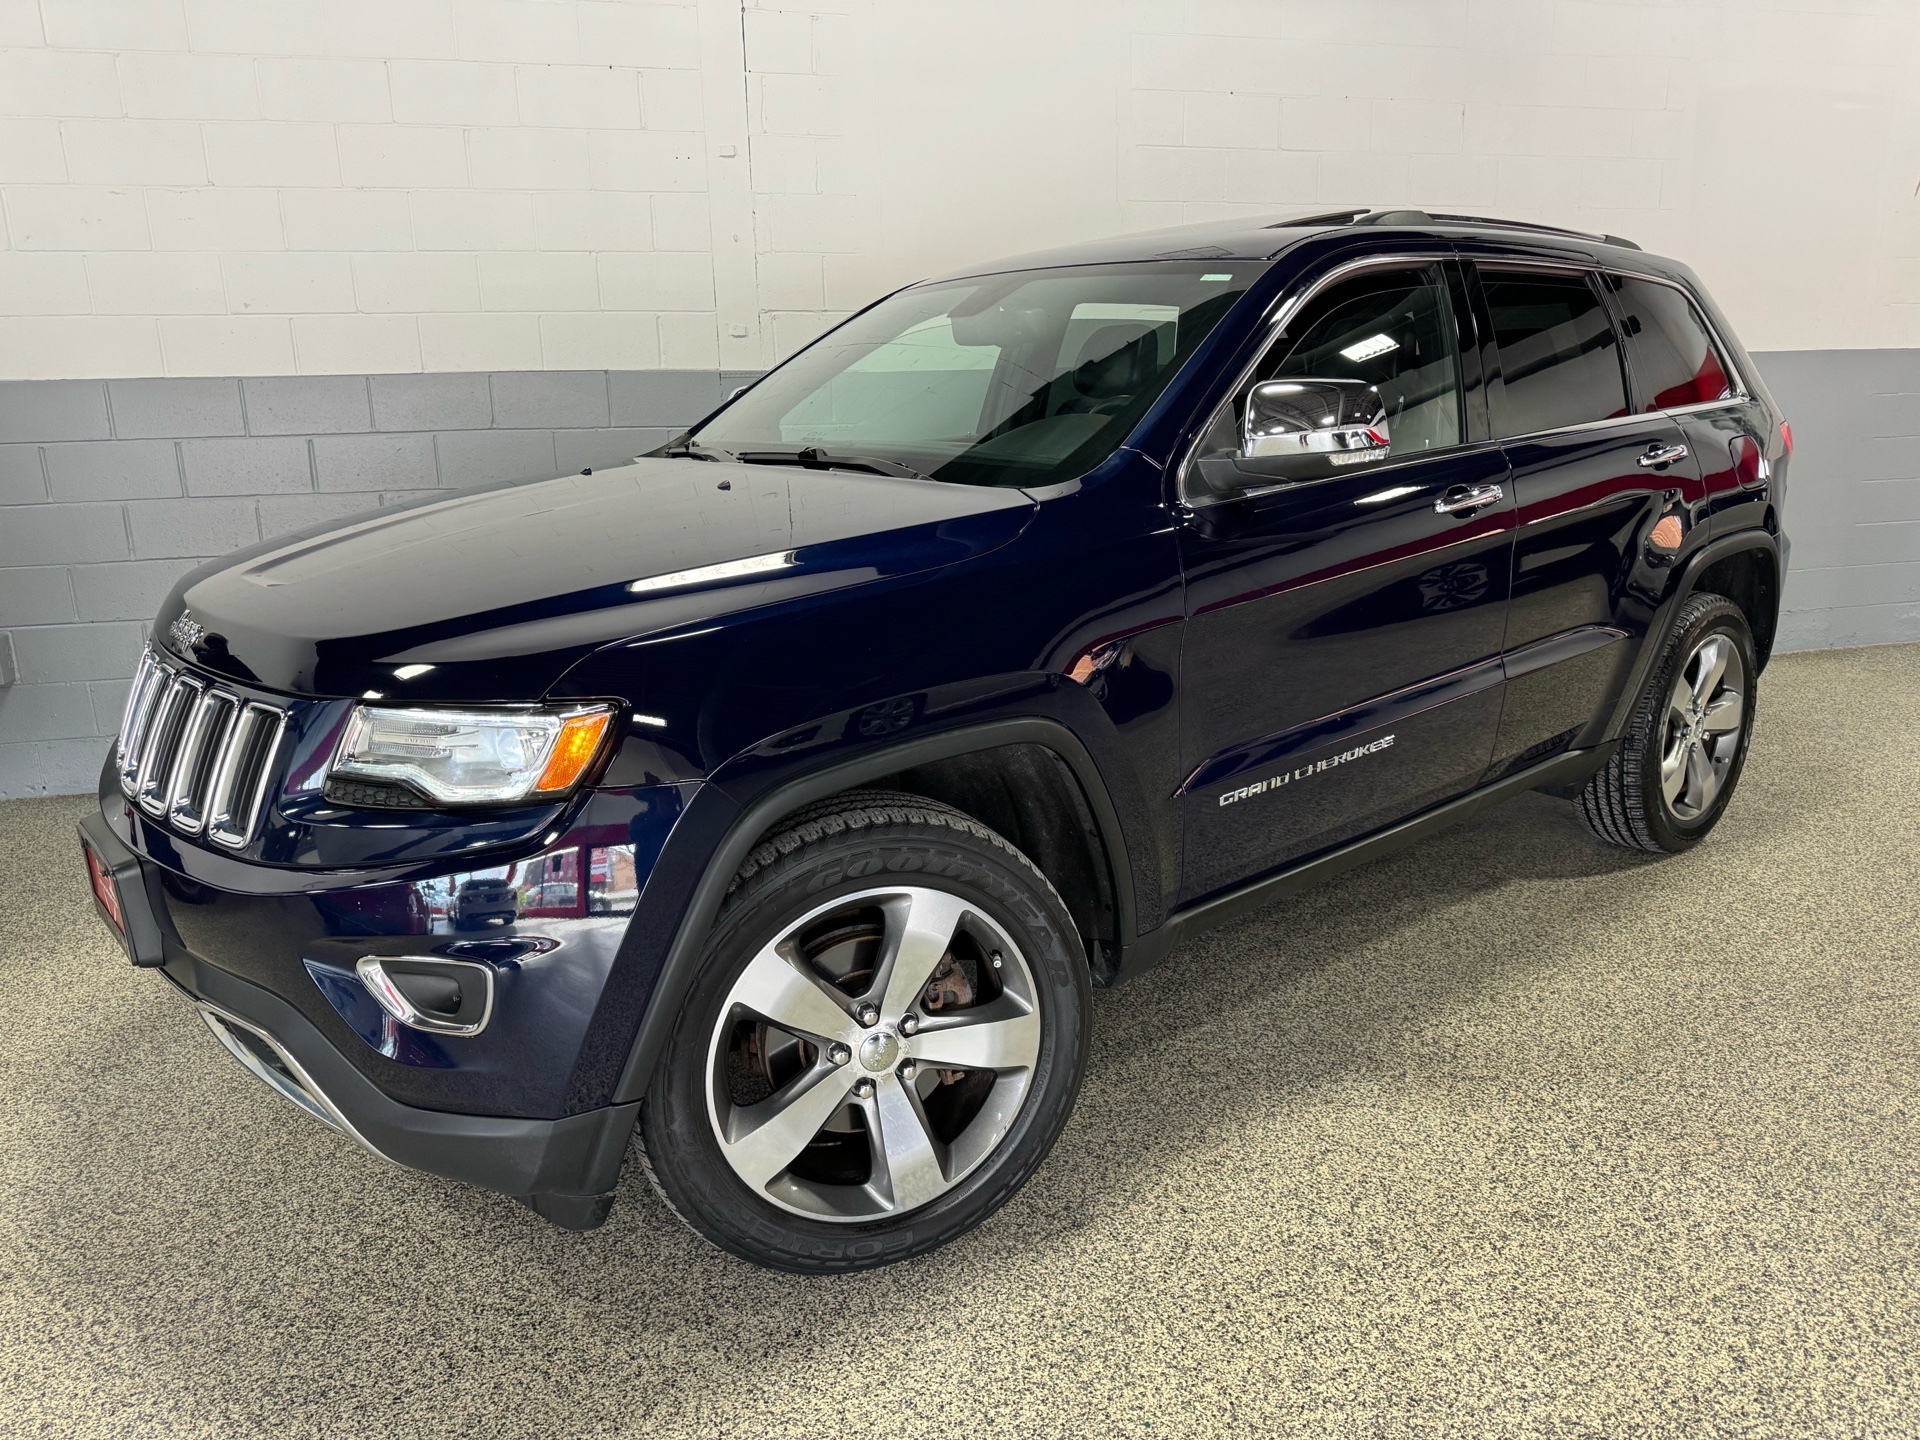 2014 Jeep GRAND CHEROKEE LIMITED/LUXURY GROUP ll PKG NAVIGTION/PANORAMIC ROOF/REAR CAMERA/PUSH START/CO